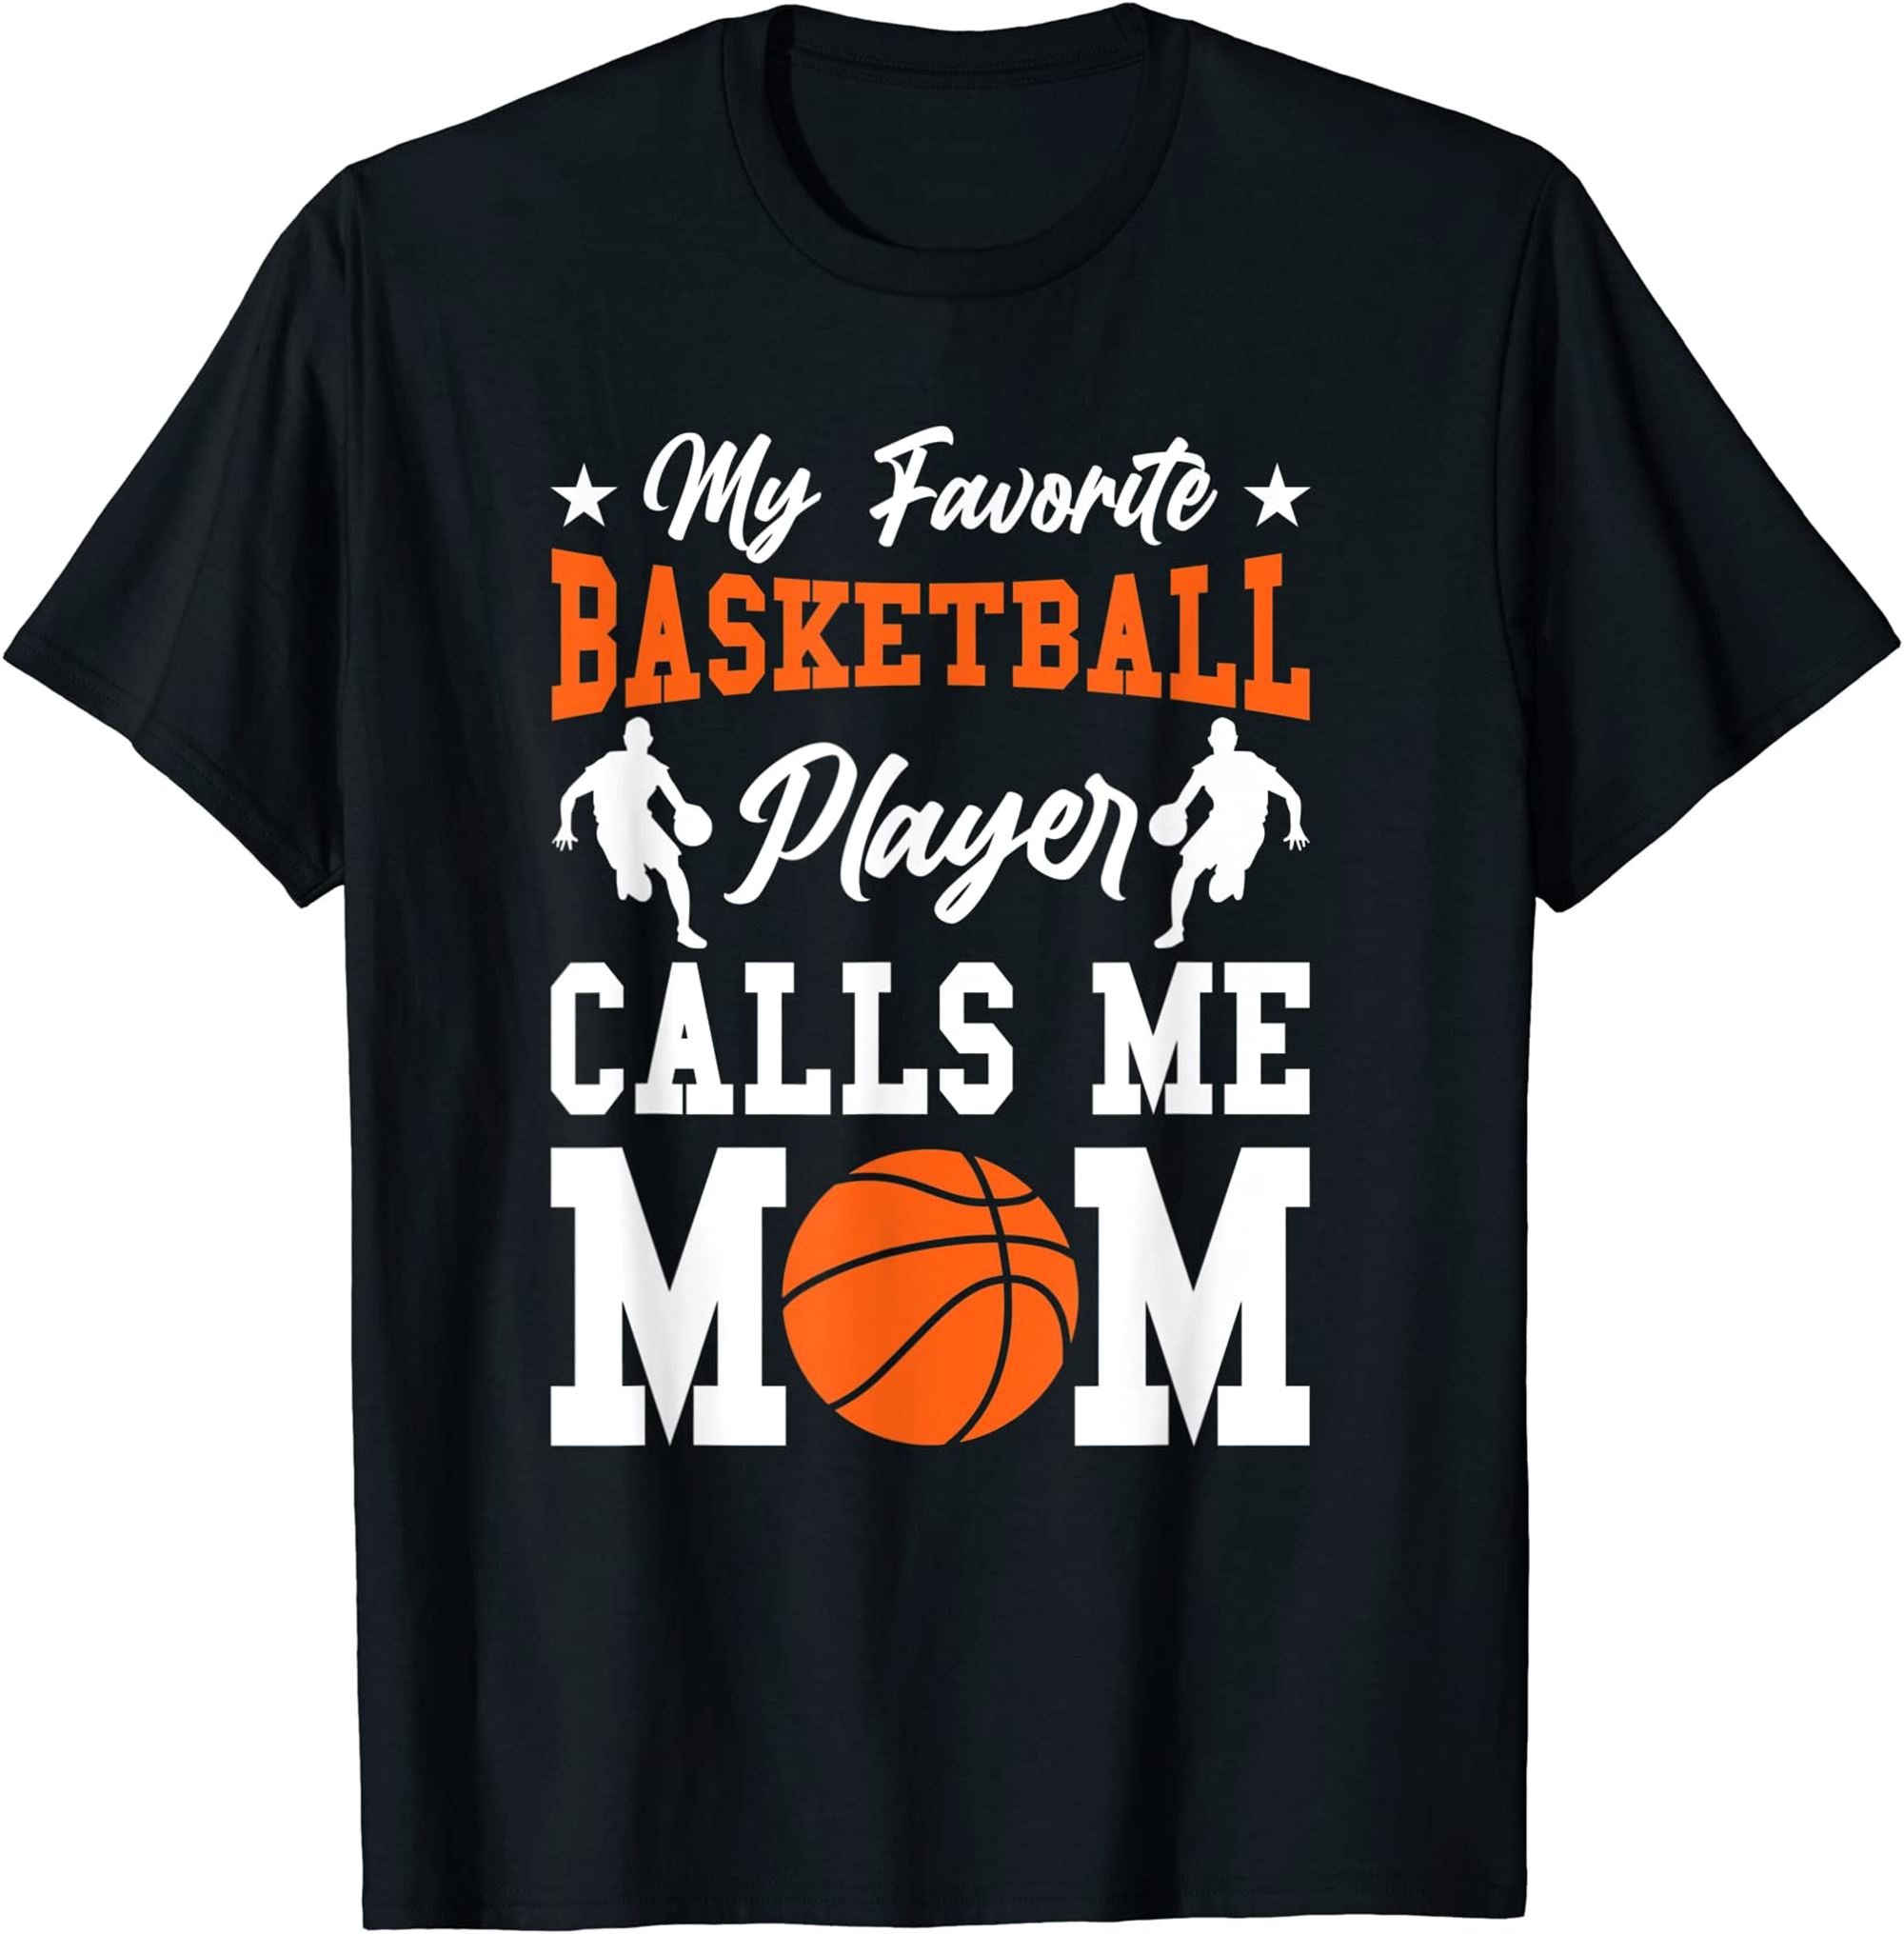 Funny My Favorite Basketball Player Calls Mom T-shirt Plus Size Up To 5xl